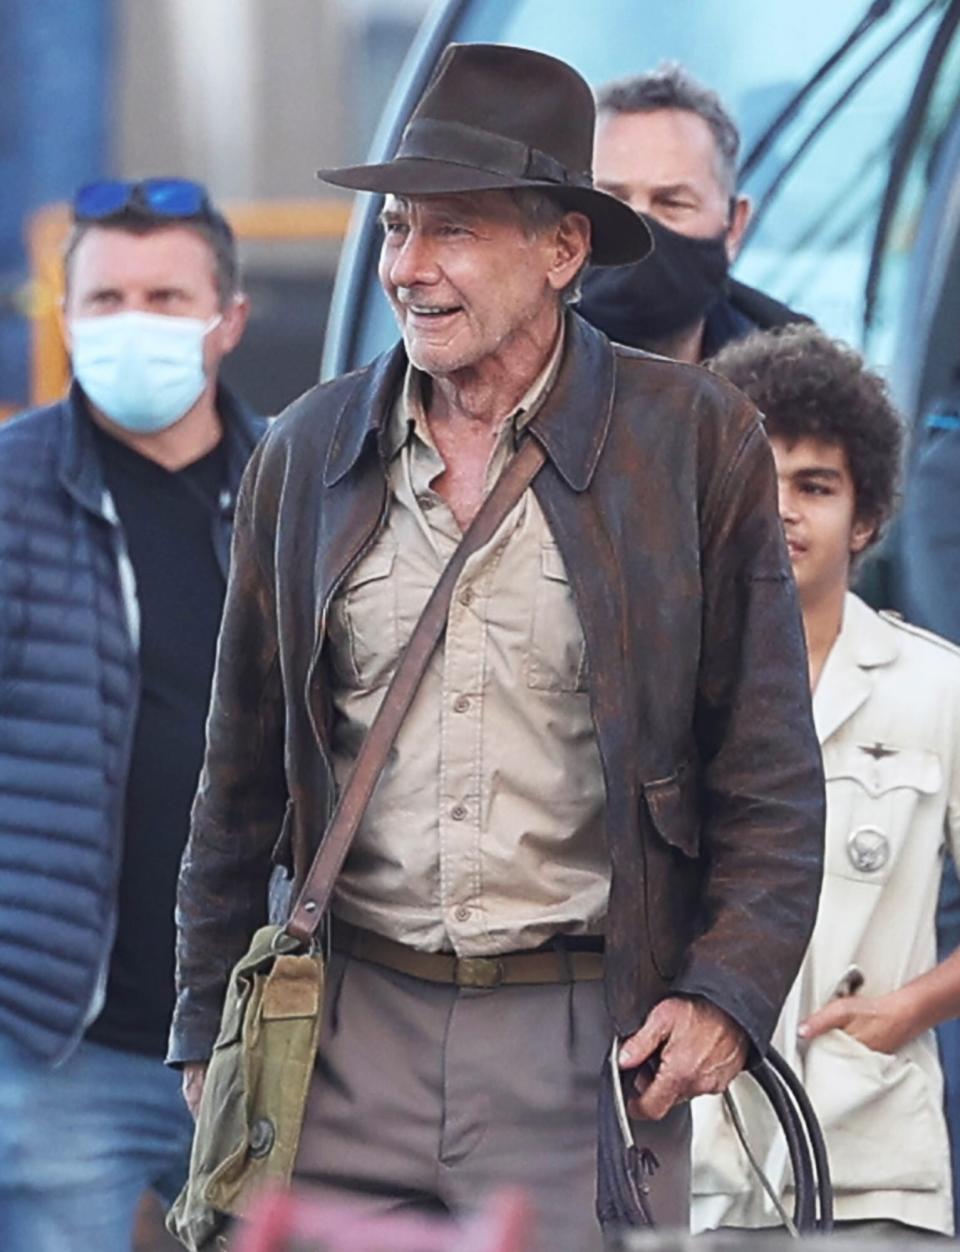 Harrison Ford is seen on the set of "Indiana Jones 5" in Sicily on October 18, 2021 in Castellammare del Golfo, Italy